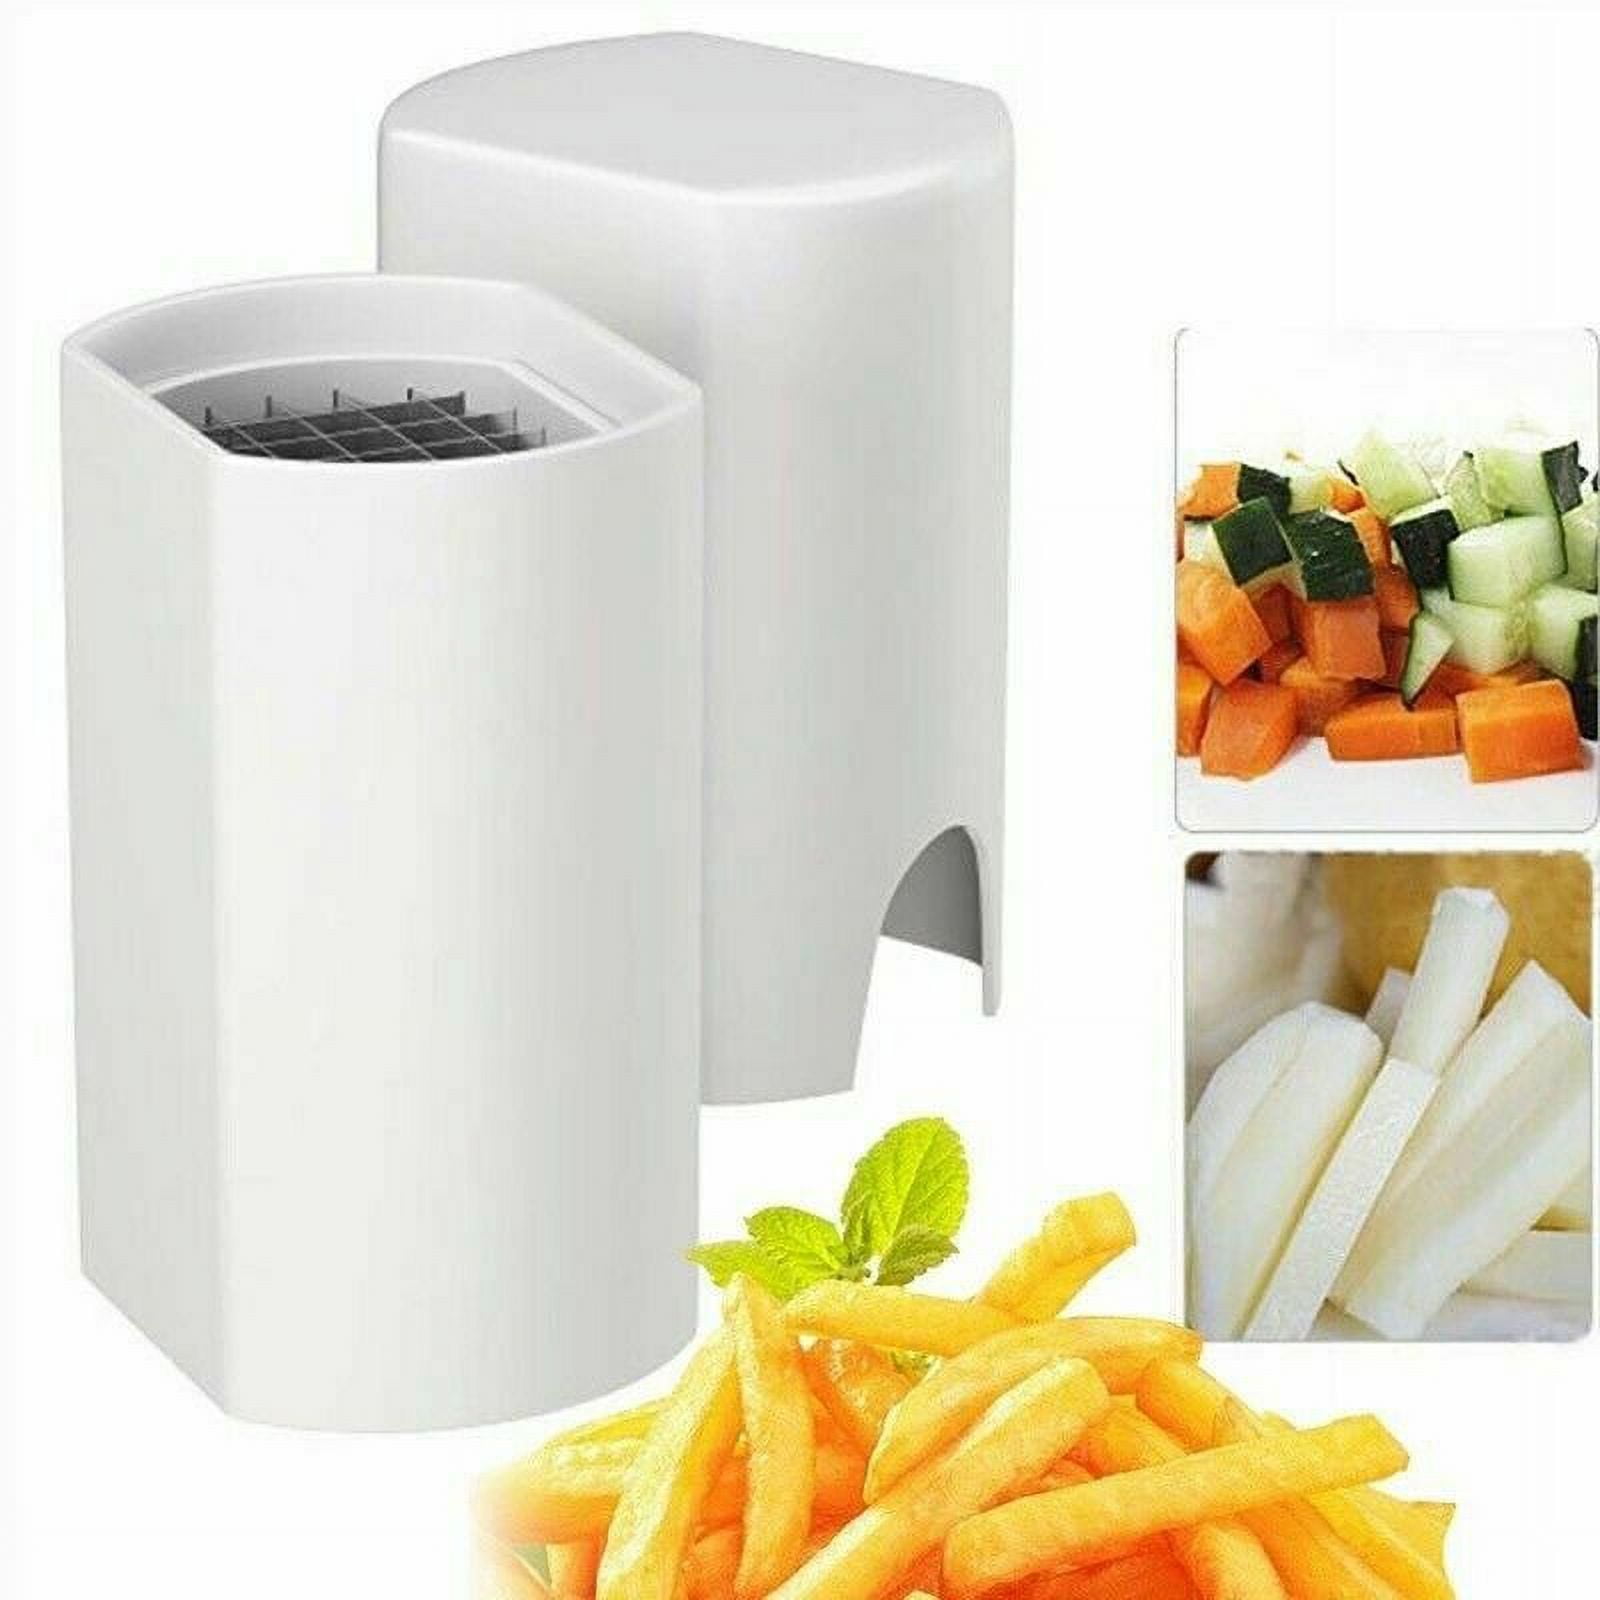 Gary Matte Hardware on Instagram: Tower Fry Cutter - Quickly cut french  fries and veggie sticks in one easy motion. $22.99